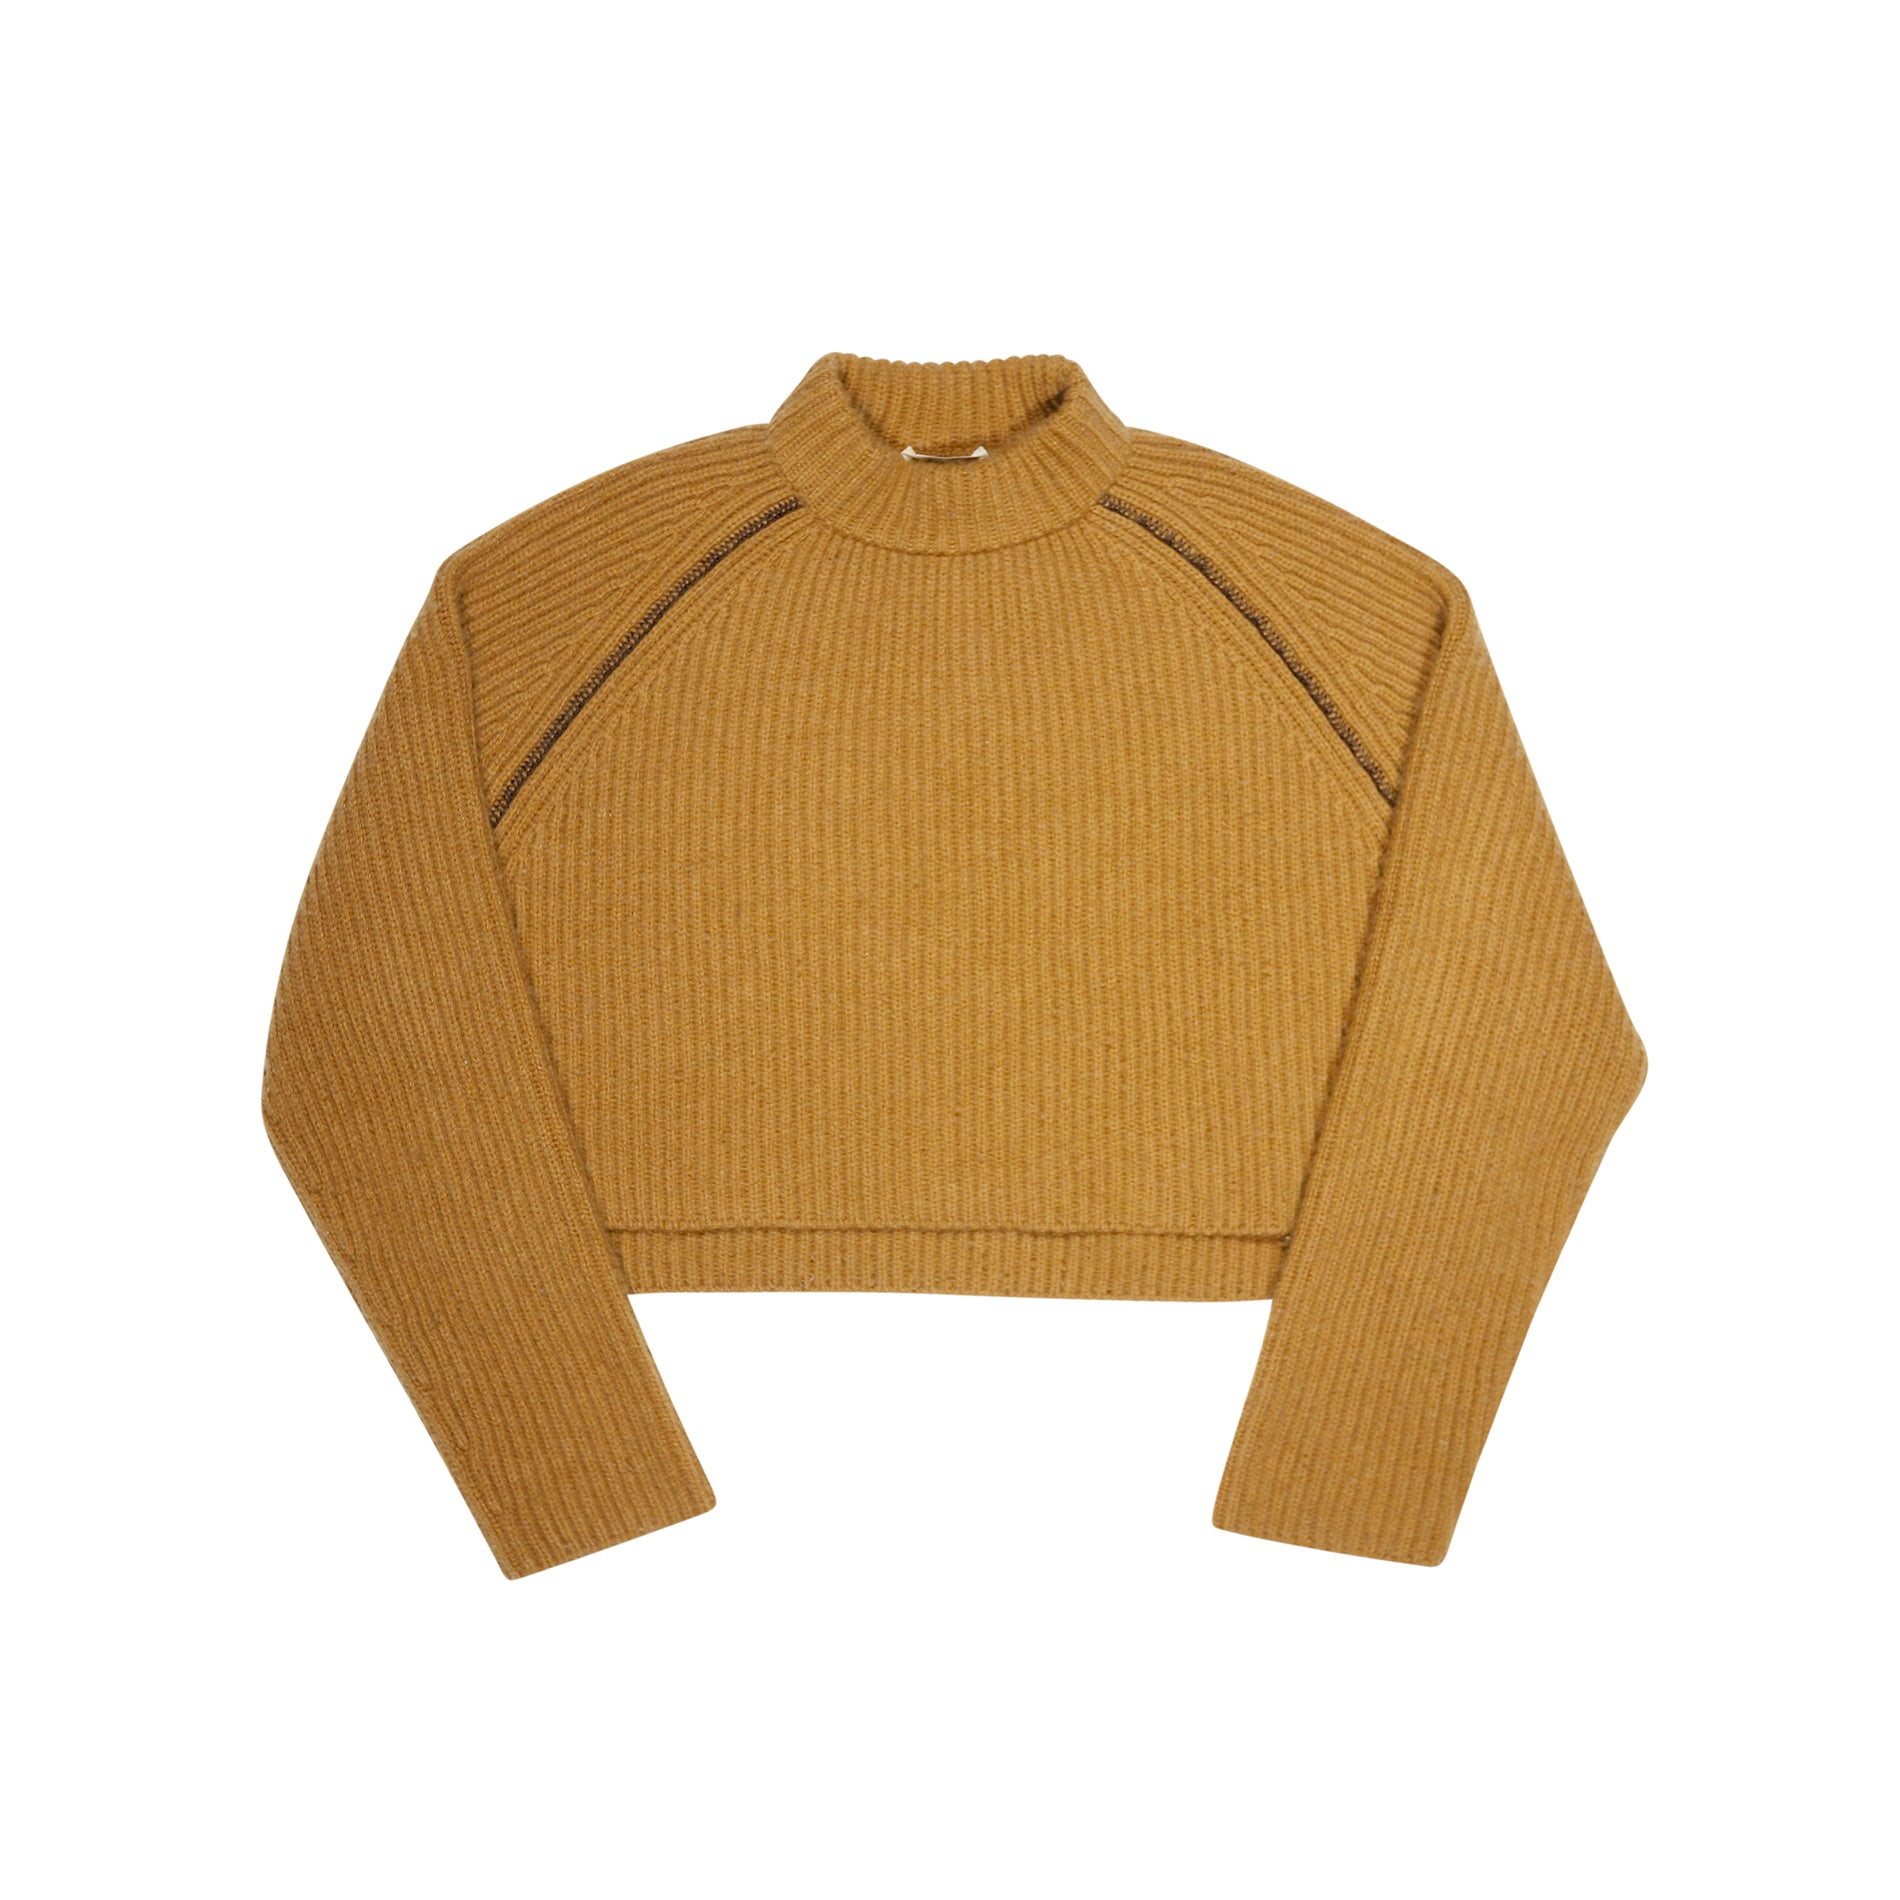 Celine by Phoebe Philo Cropped Brown Chunky Cashmere Knit